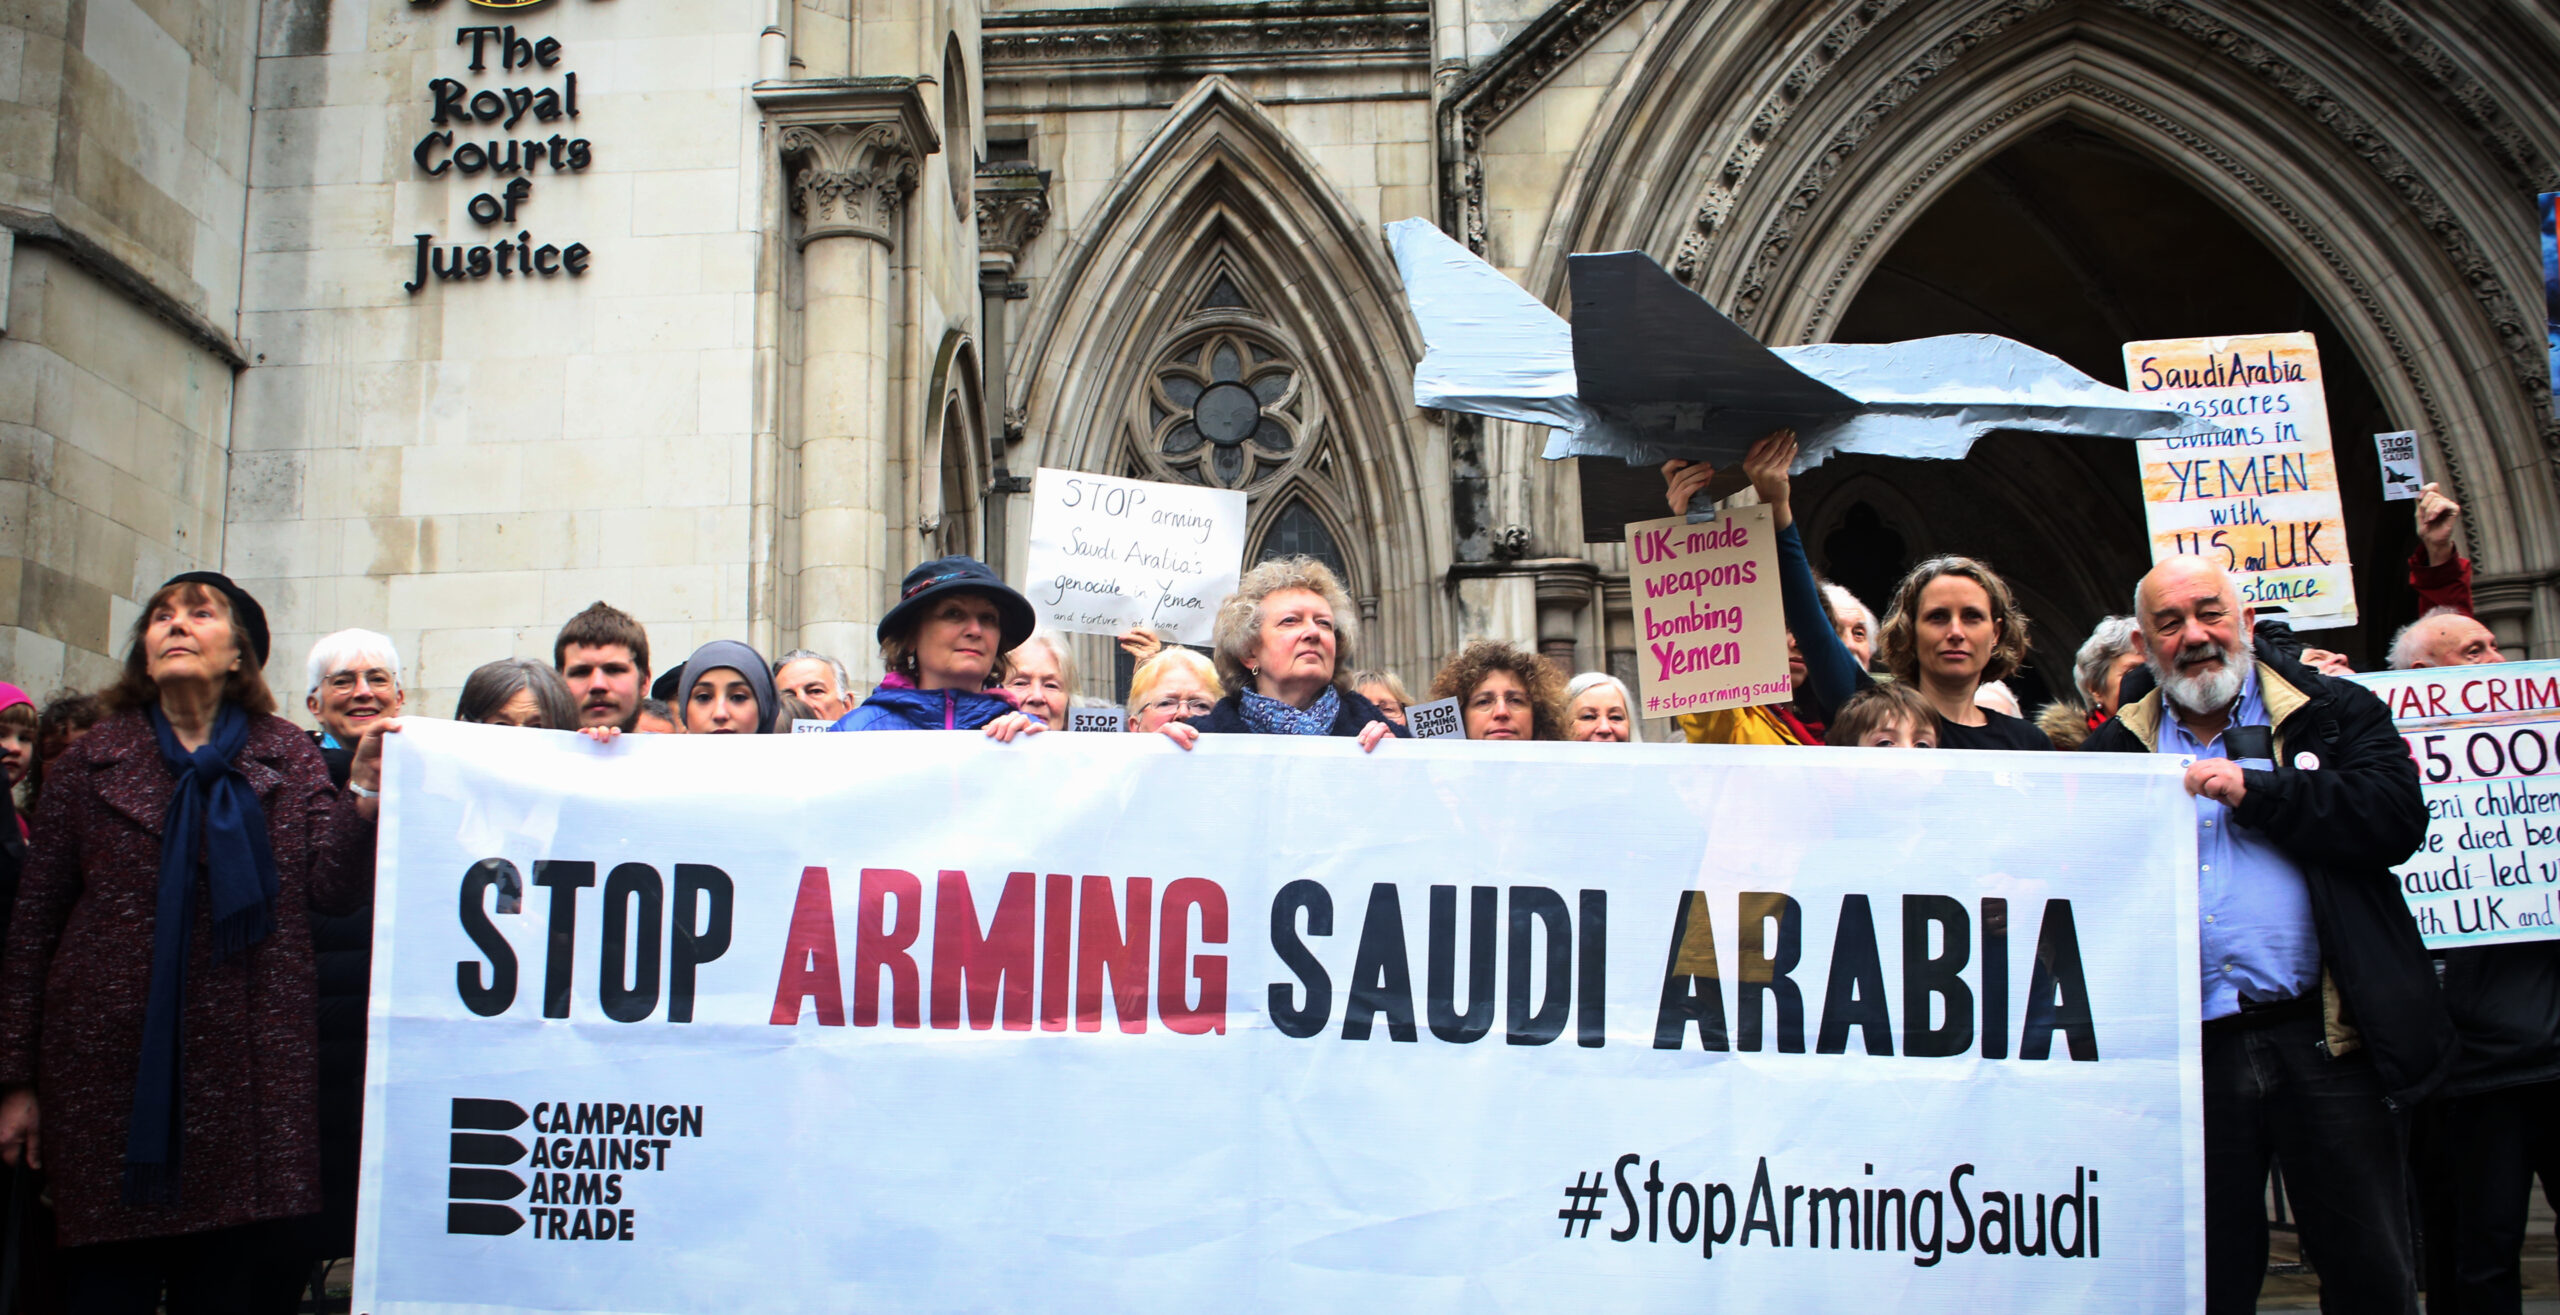 crowd of people standing in front of the Royal Courts of Justice with a 'Stop Arming Saudi Arabia #StopArmingSaudi, Campaign Against Arms Trade' banner